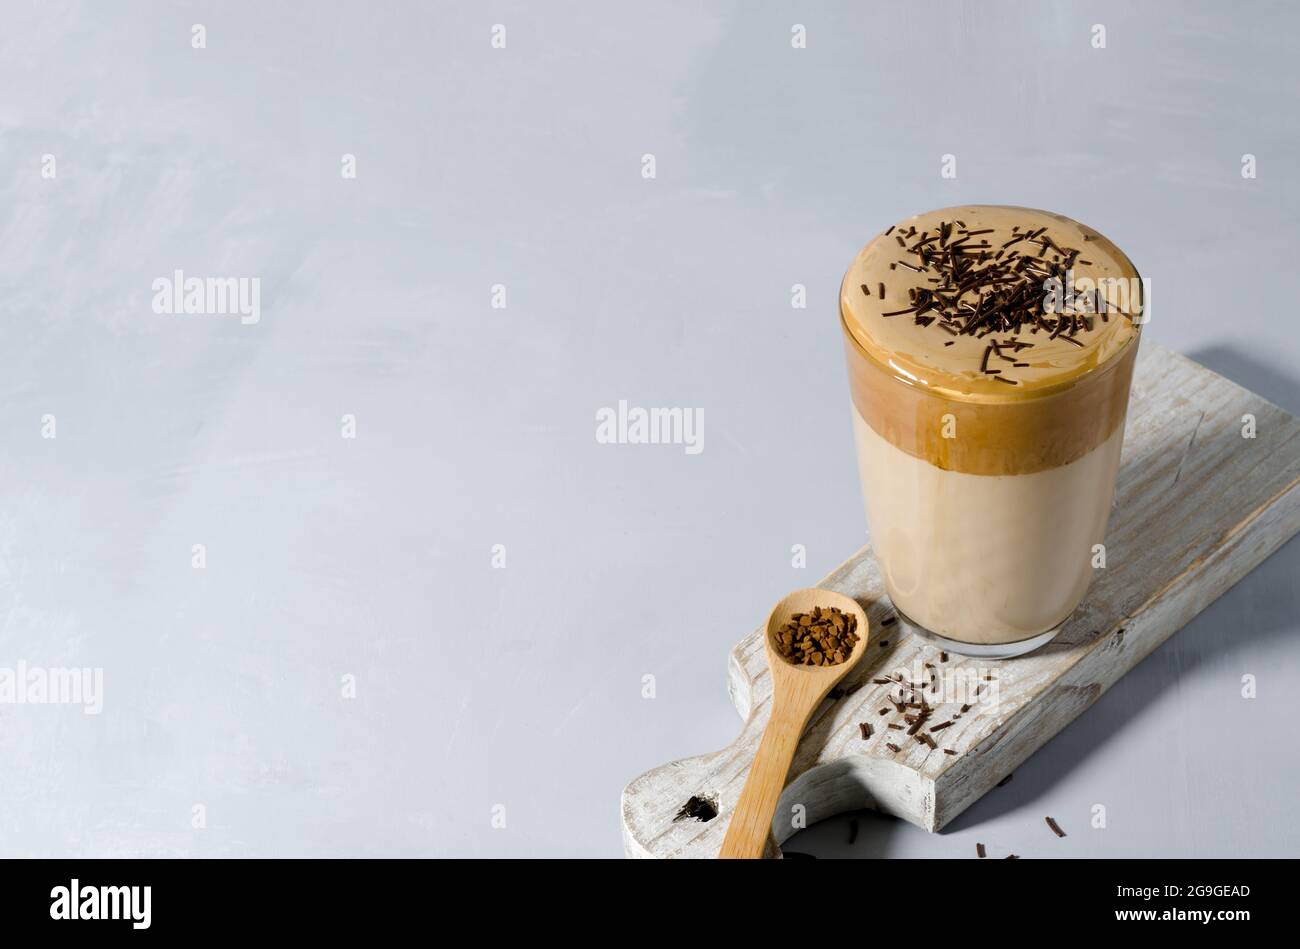 Cold coffee in a high glass on a wooden board with copying text Stock Photo